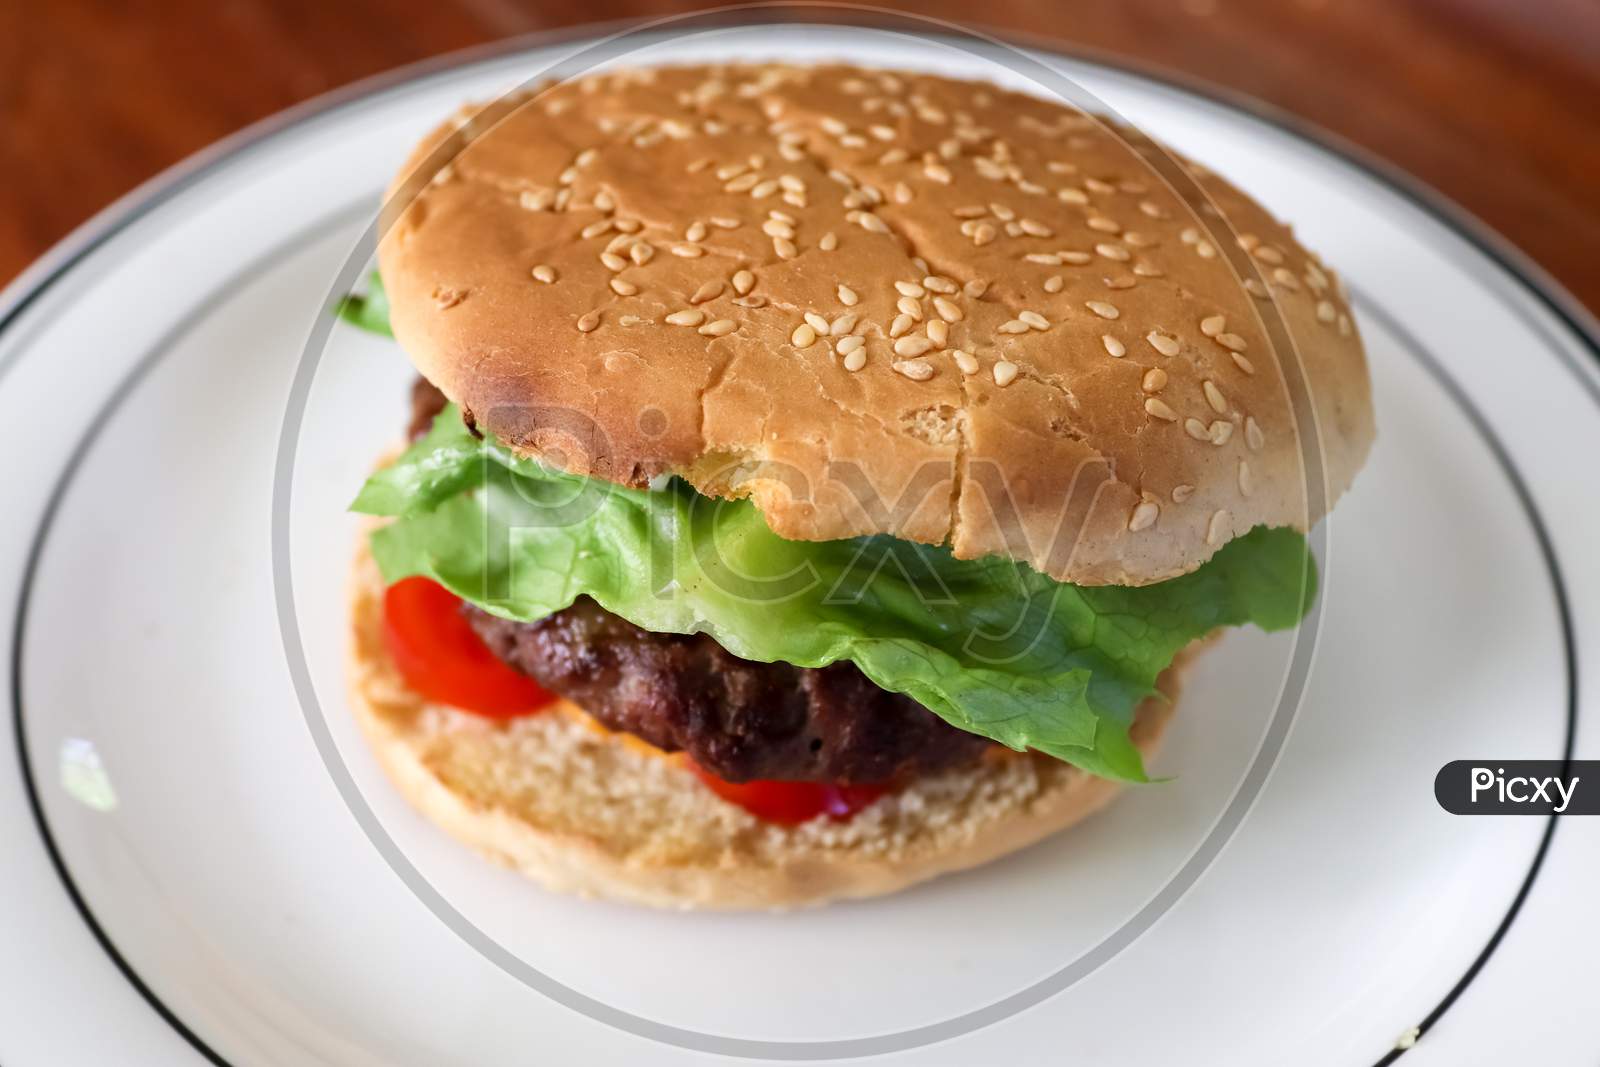 Homemade making of a grilled burger with tomatoes and salad on a plate.